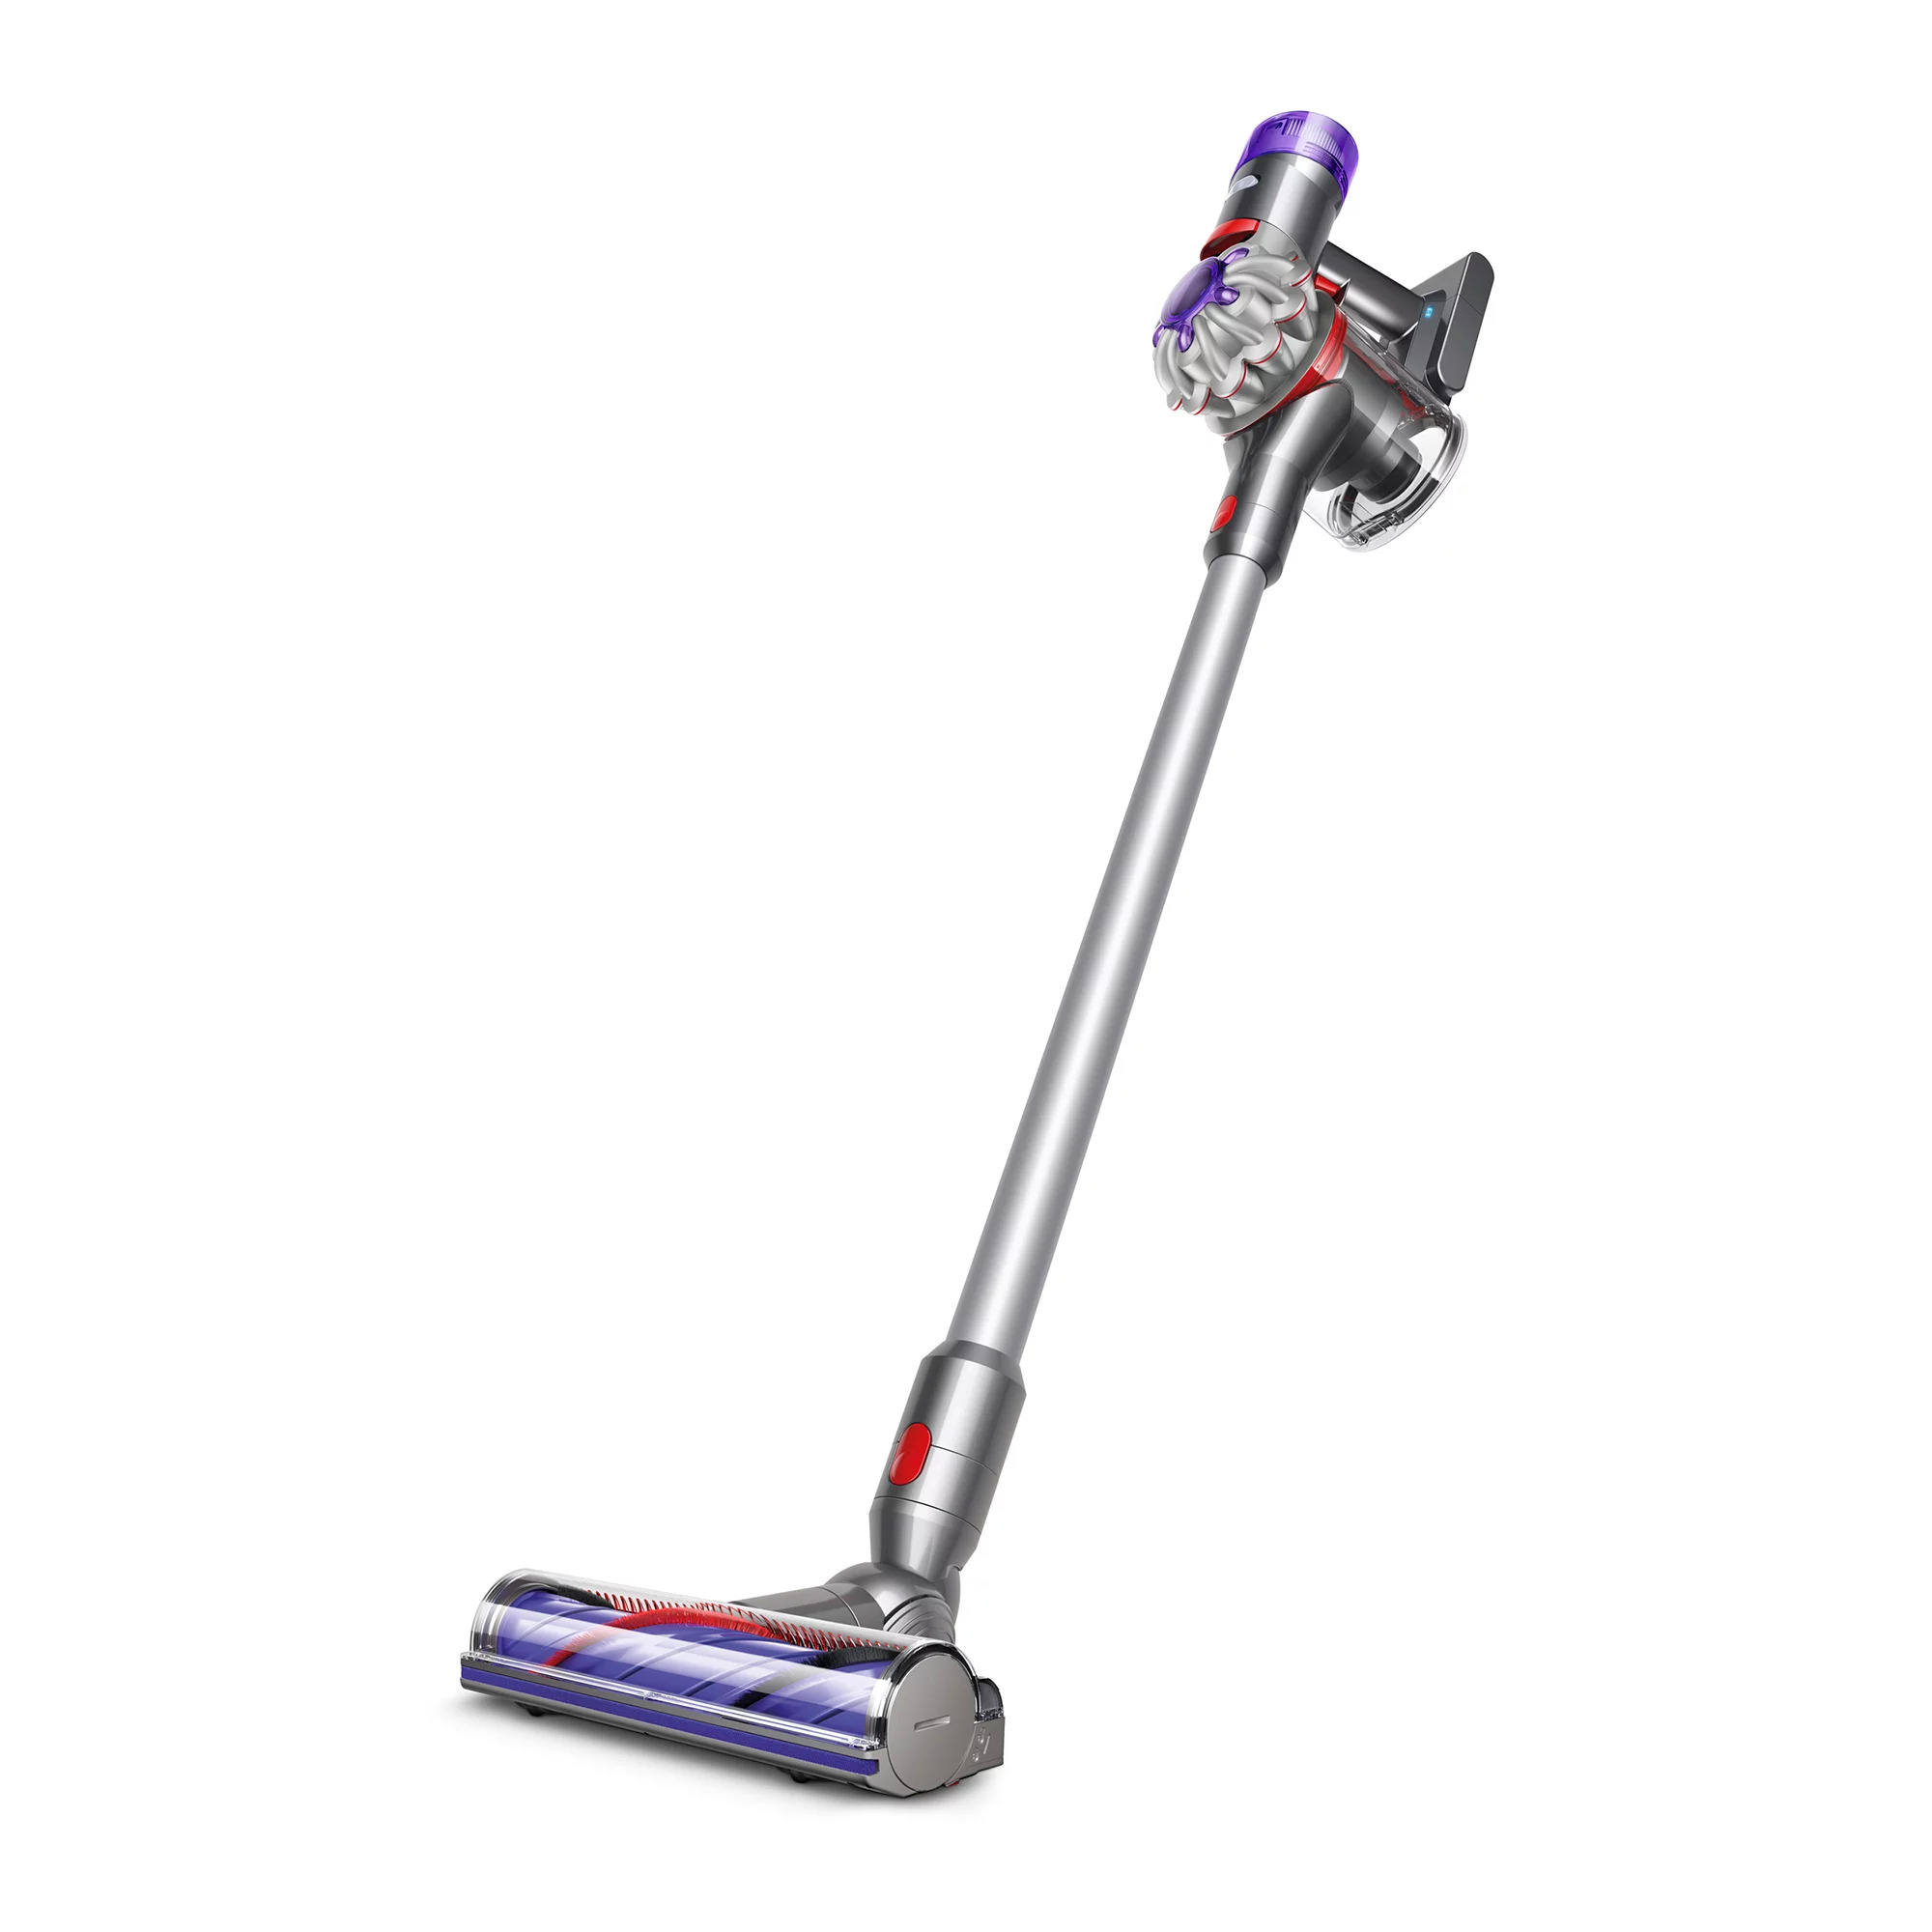 Dyson V7 Advanced Cordless Vacuum Cleaner (Silver) $220 + Free Shipping